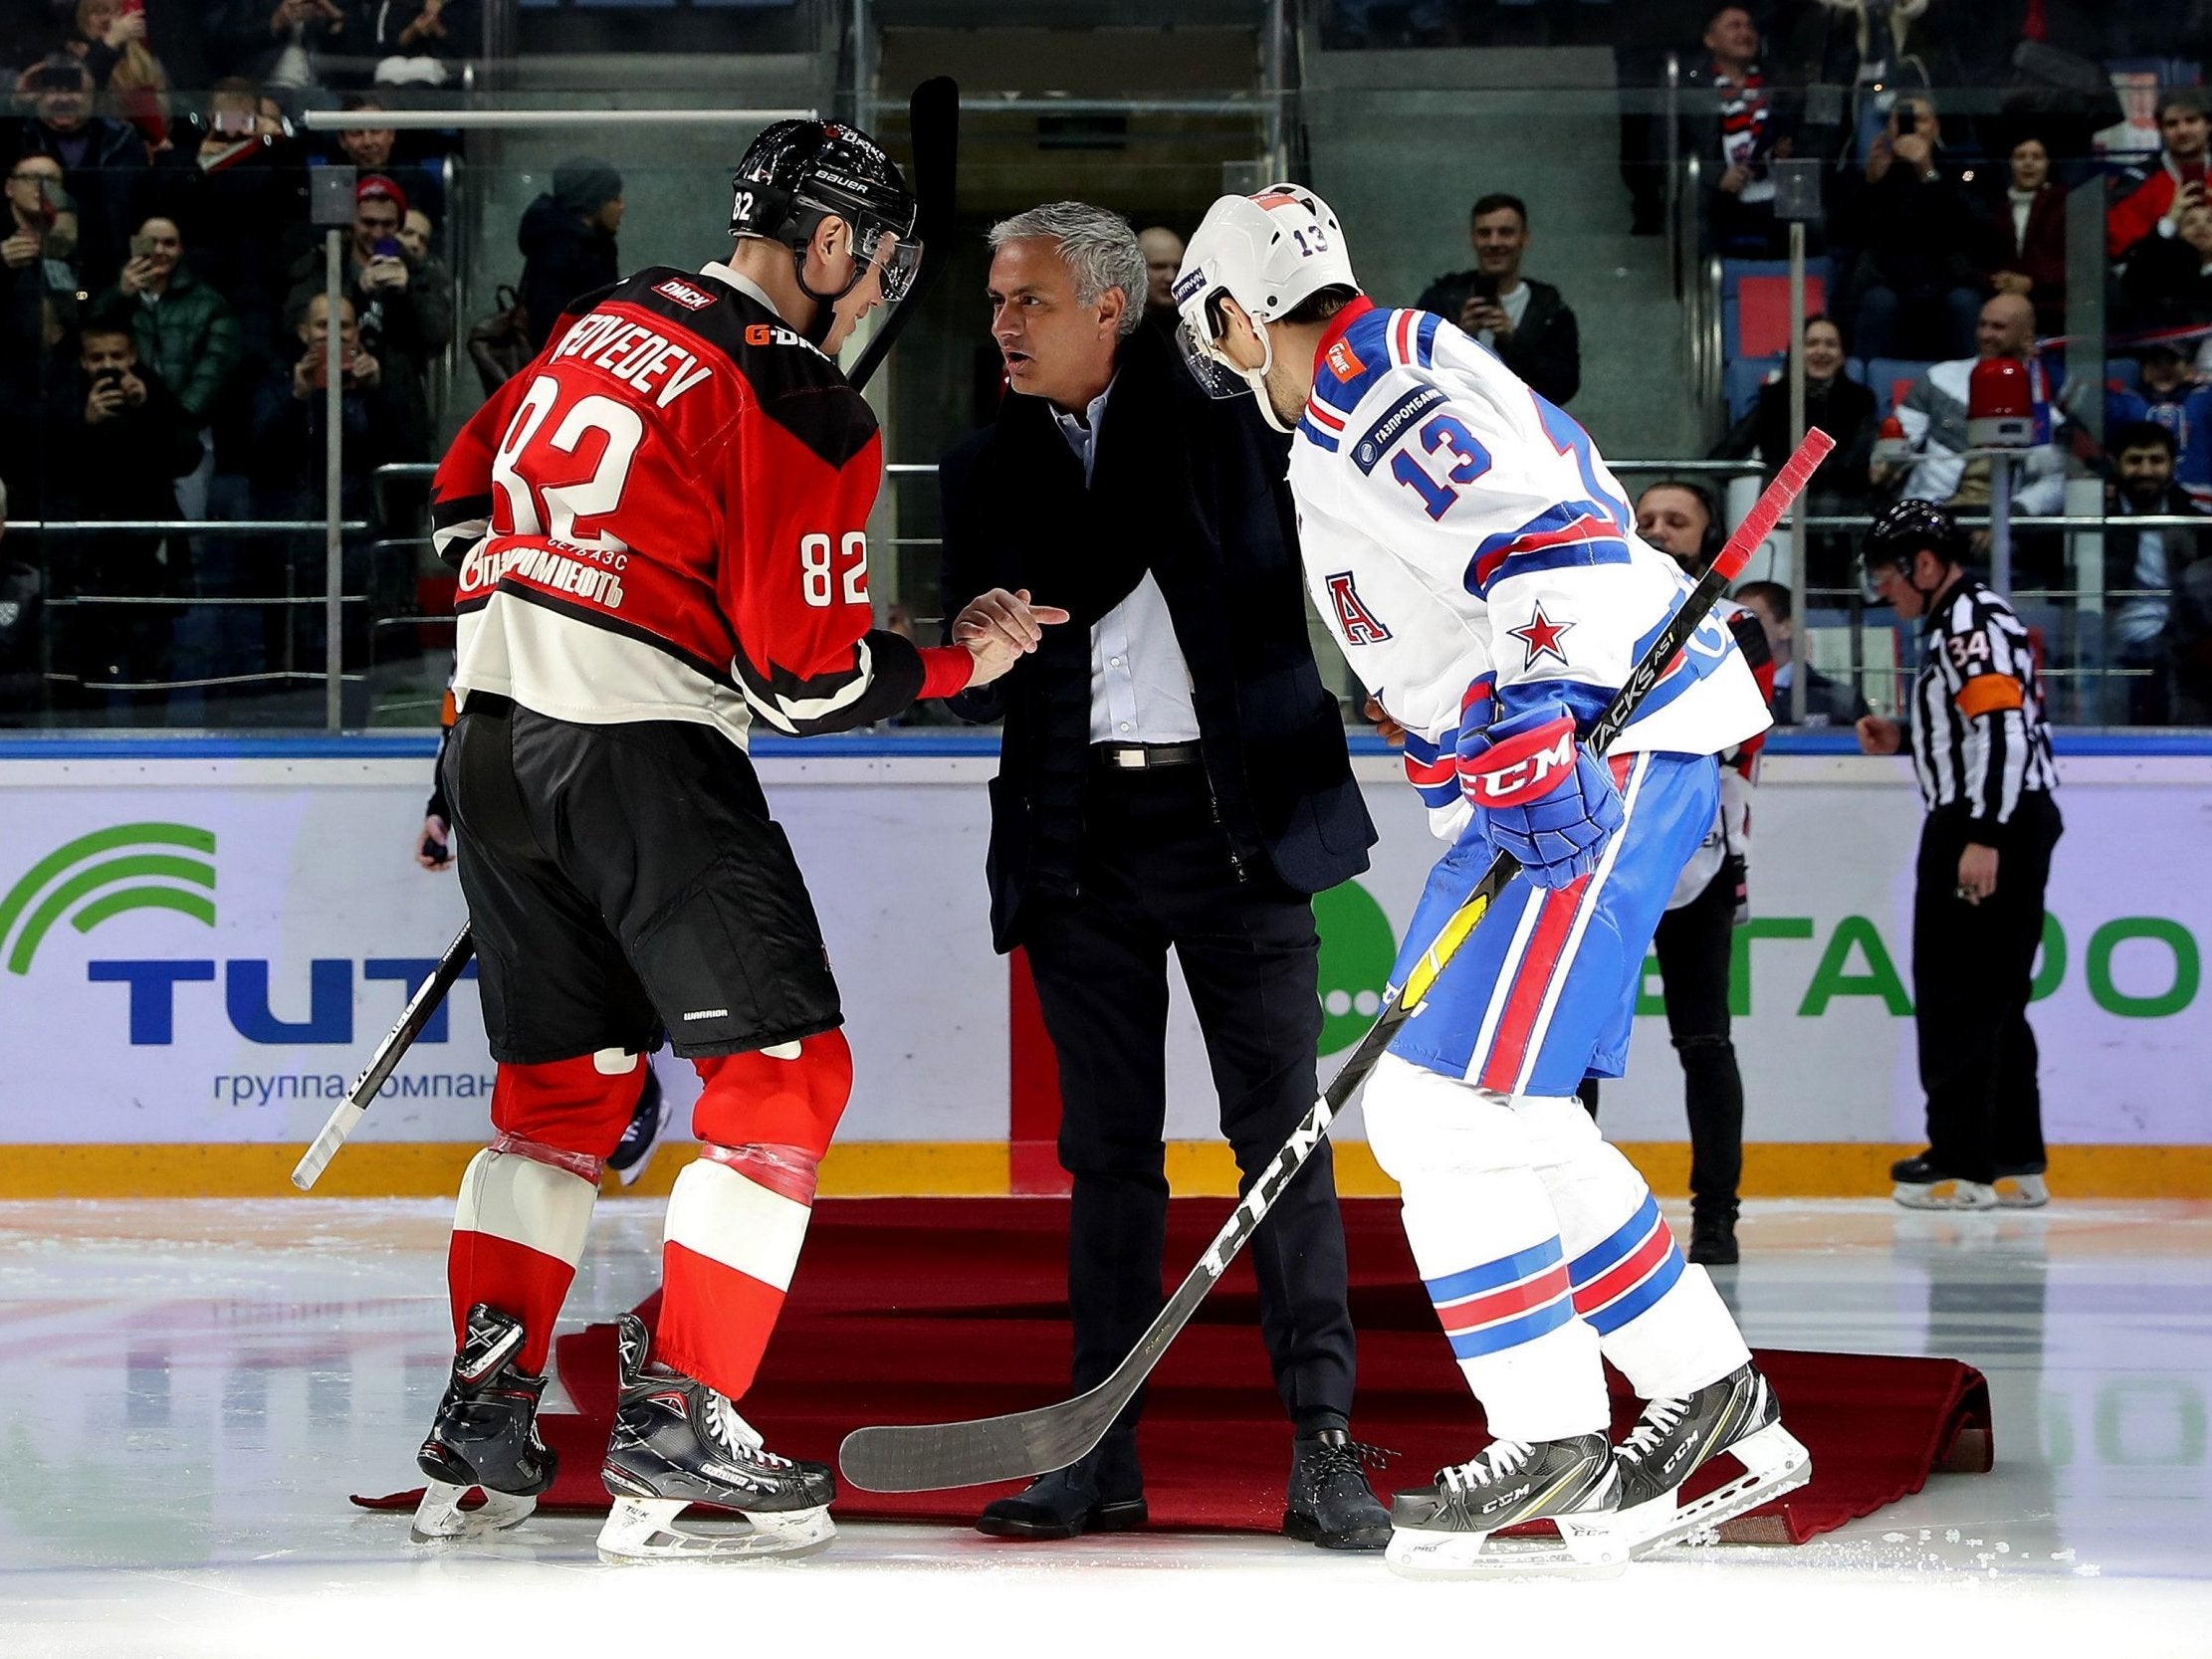 But Mourinho was able to laugh it off and climb back to his feet with the help of Evgeny Medvedev and Pavel Datsyuk